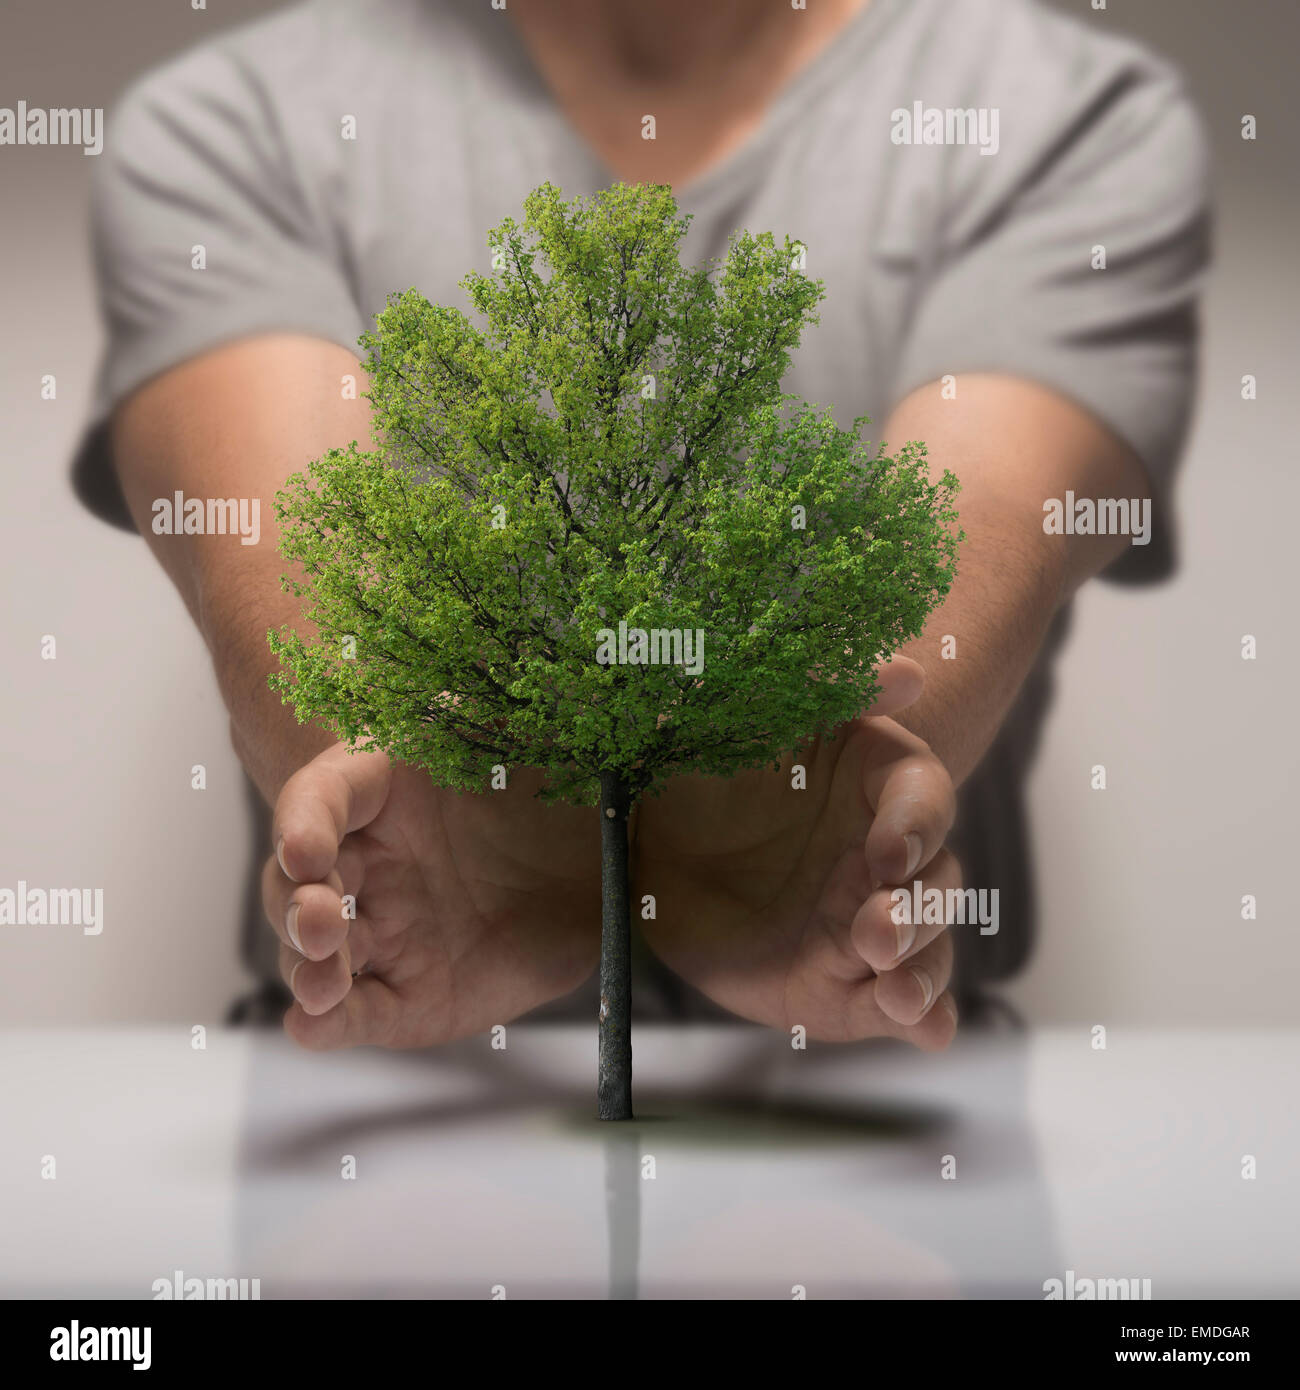 Two hands around a small tree, symbol of ecology or environmental protection. Stock Photo